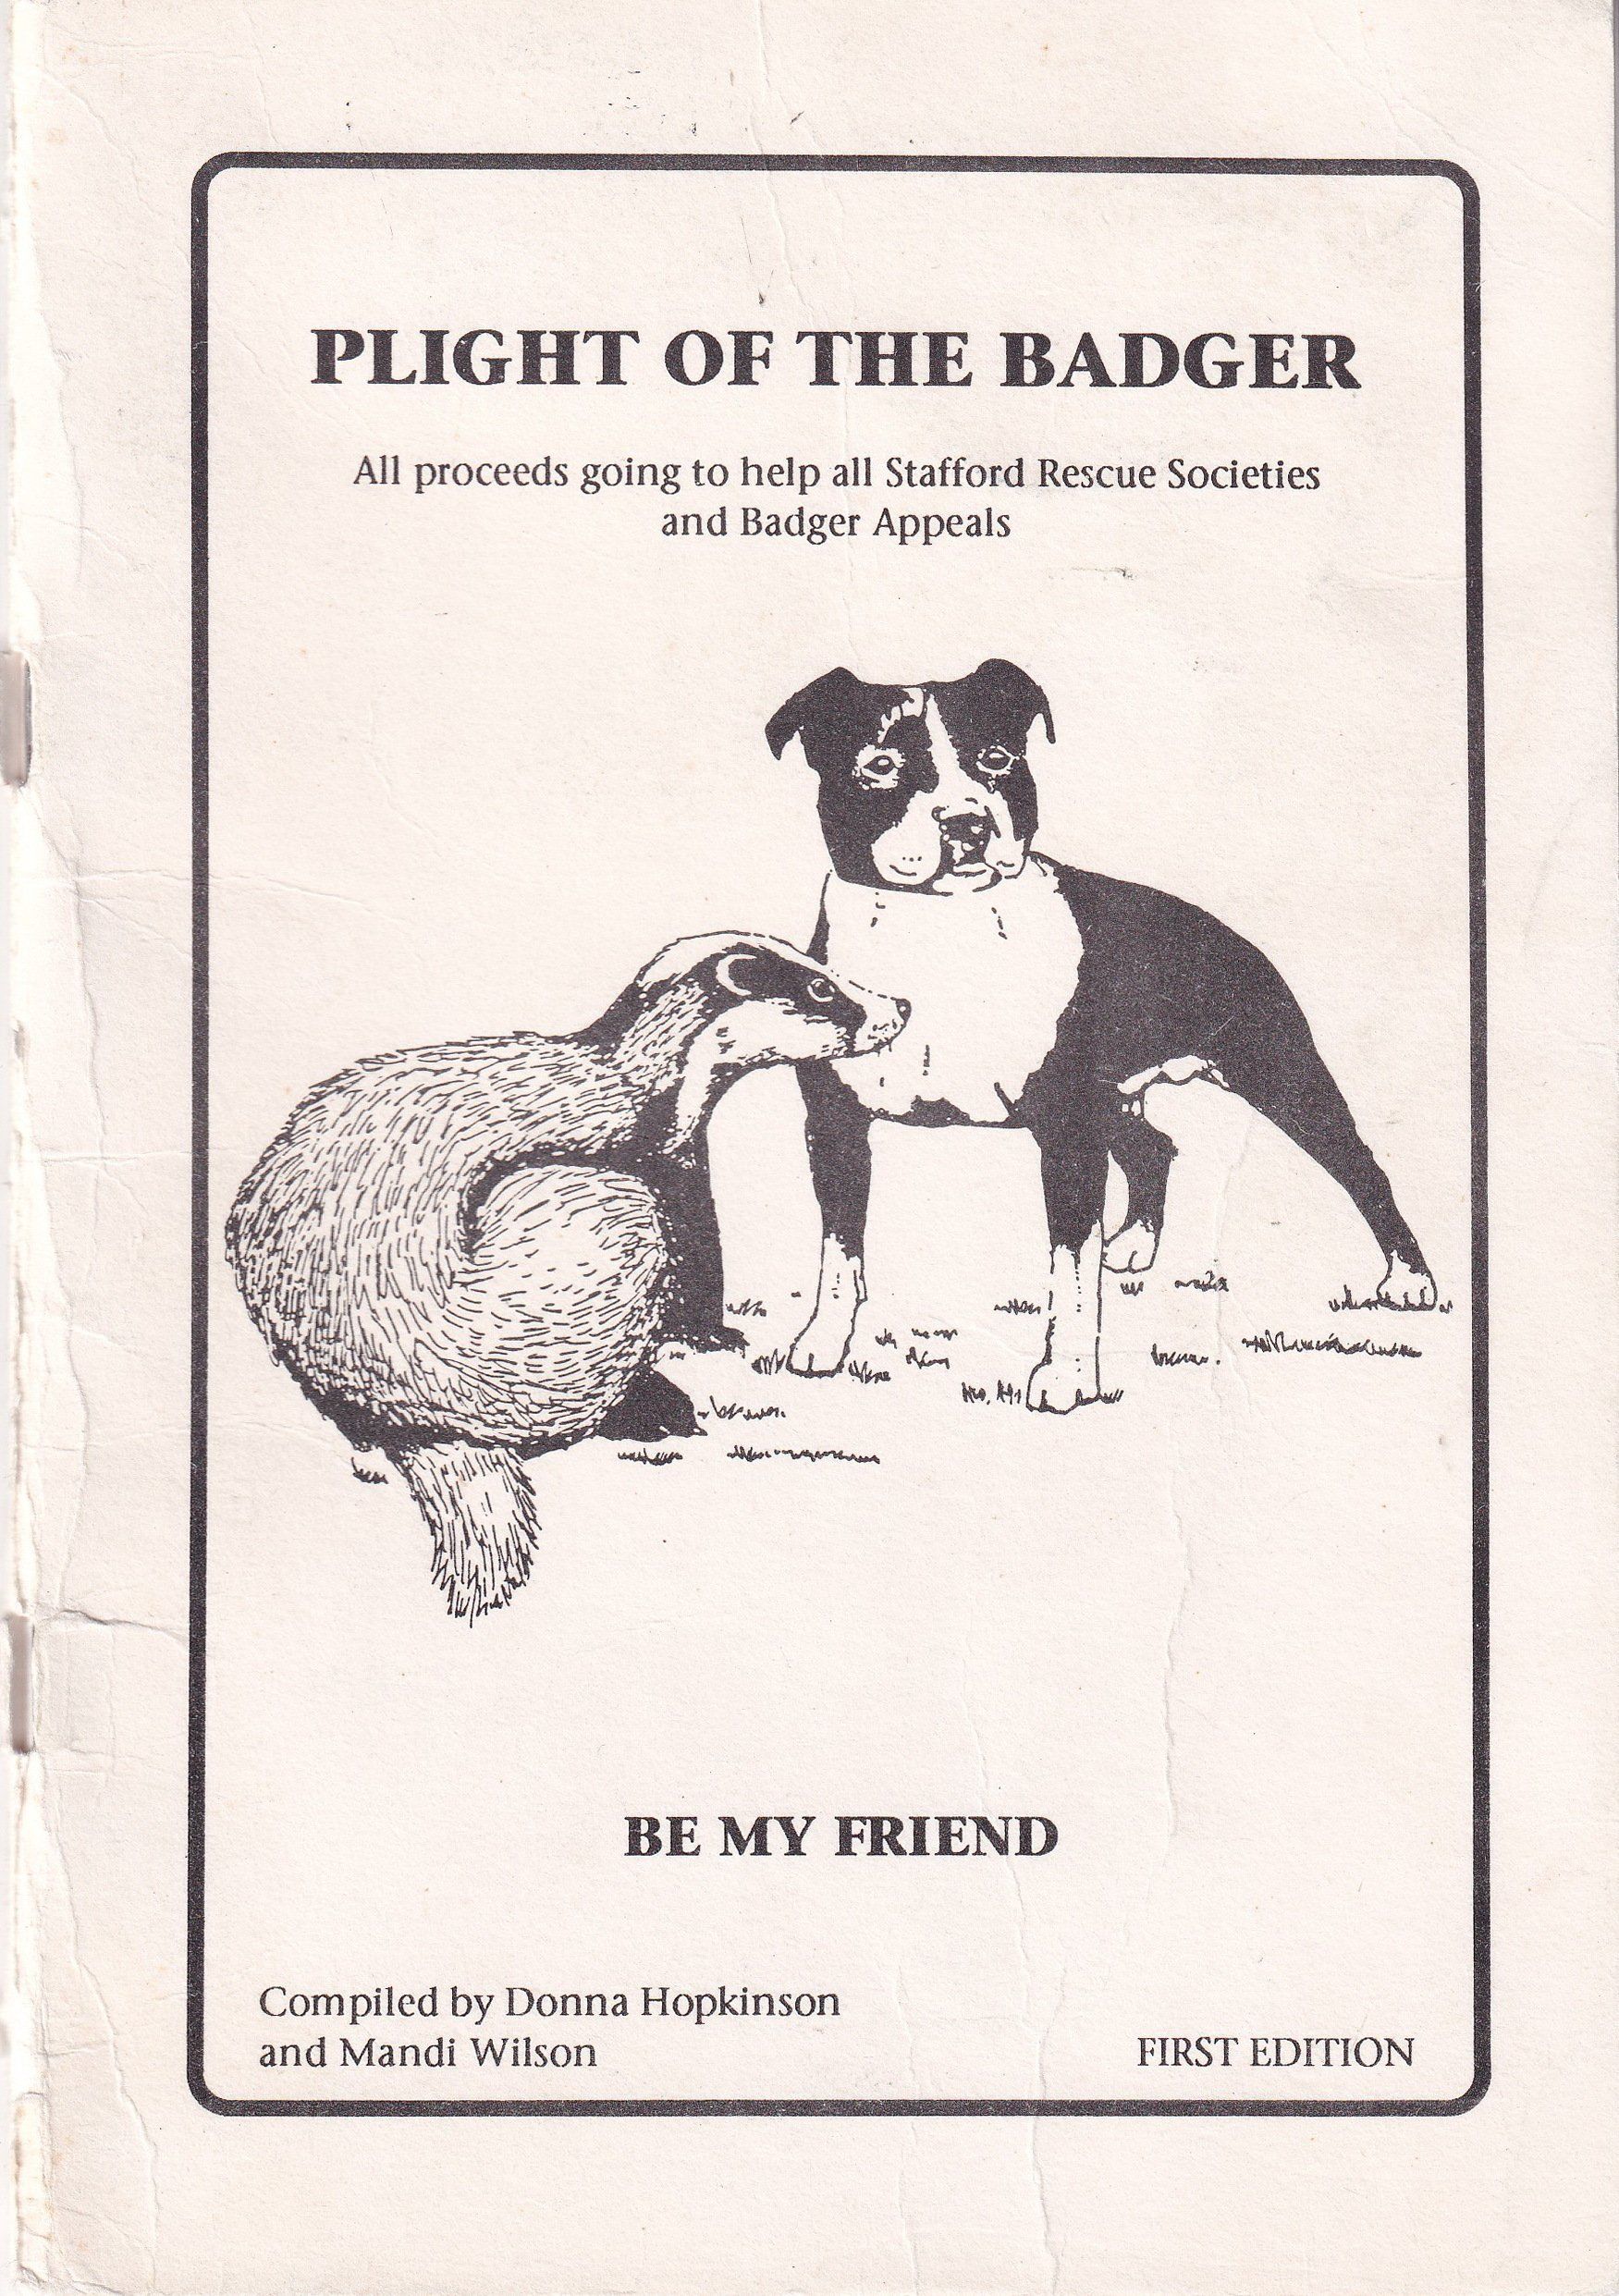 Plight of The Badger compiled by Donna Hopkinson & Mandi Wilson